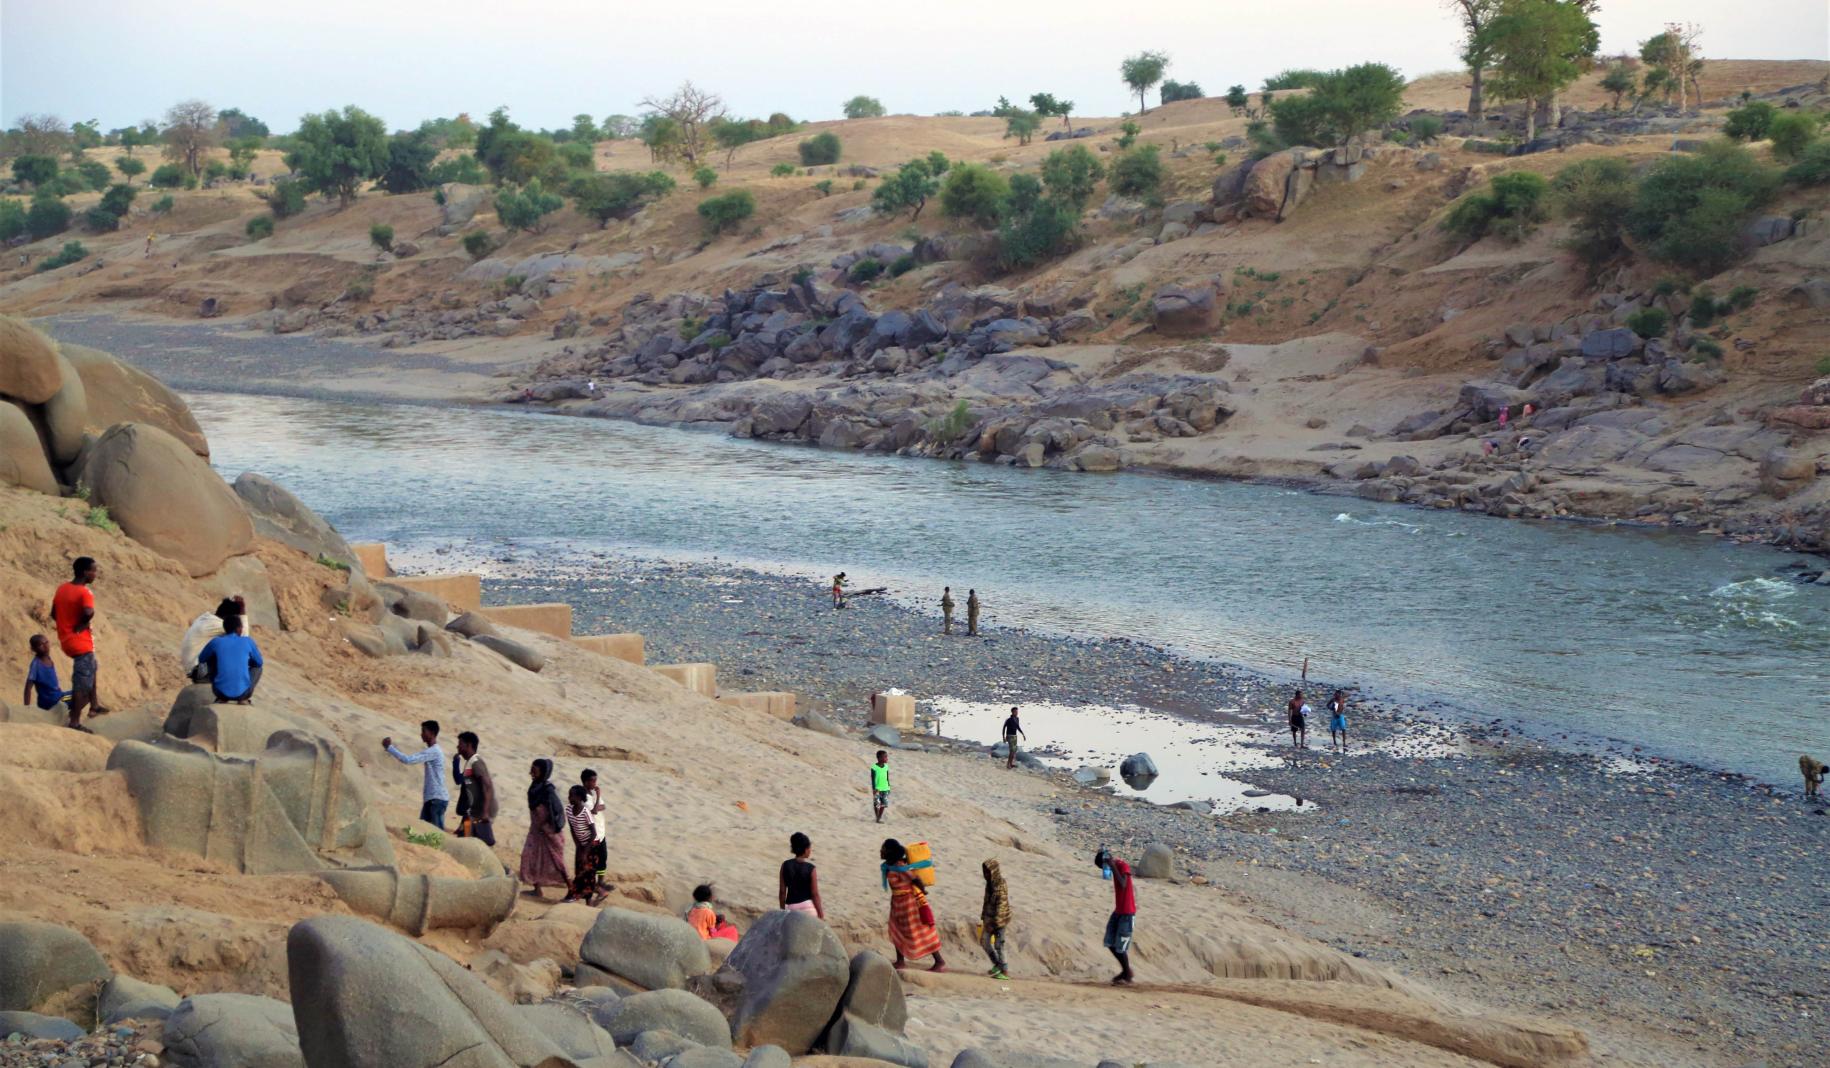 The photo shows refugees walking across an area of water and up a large hill.